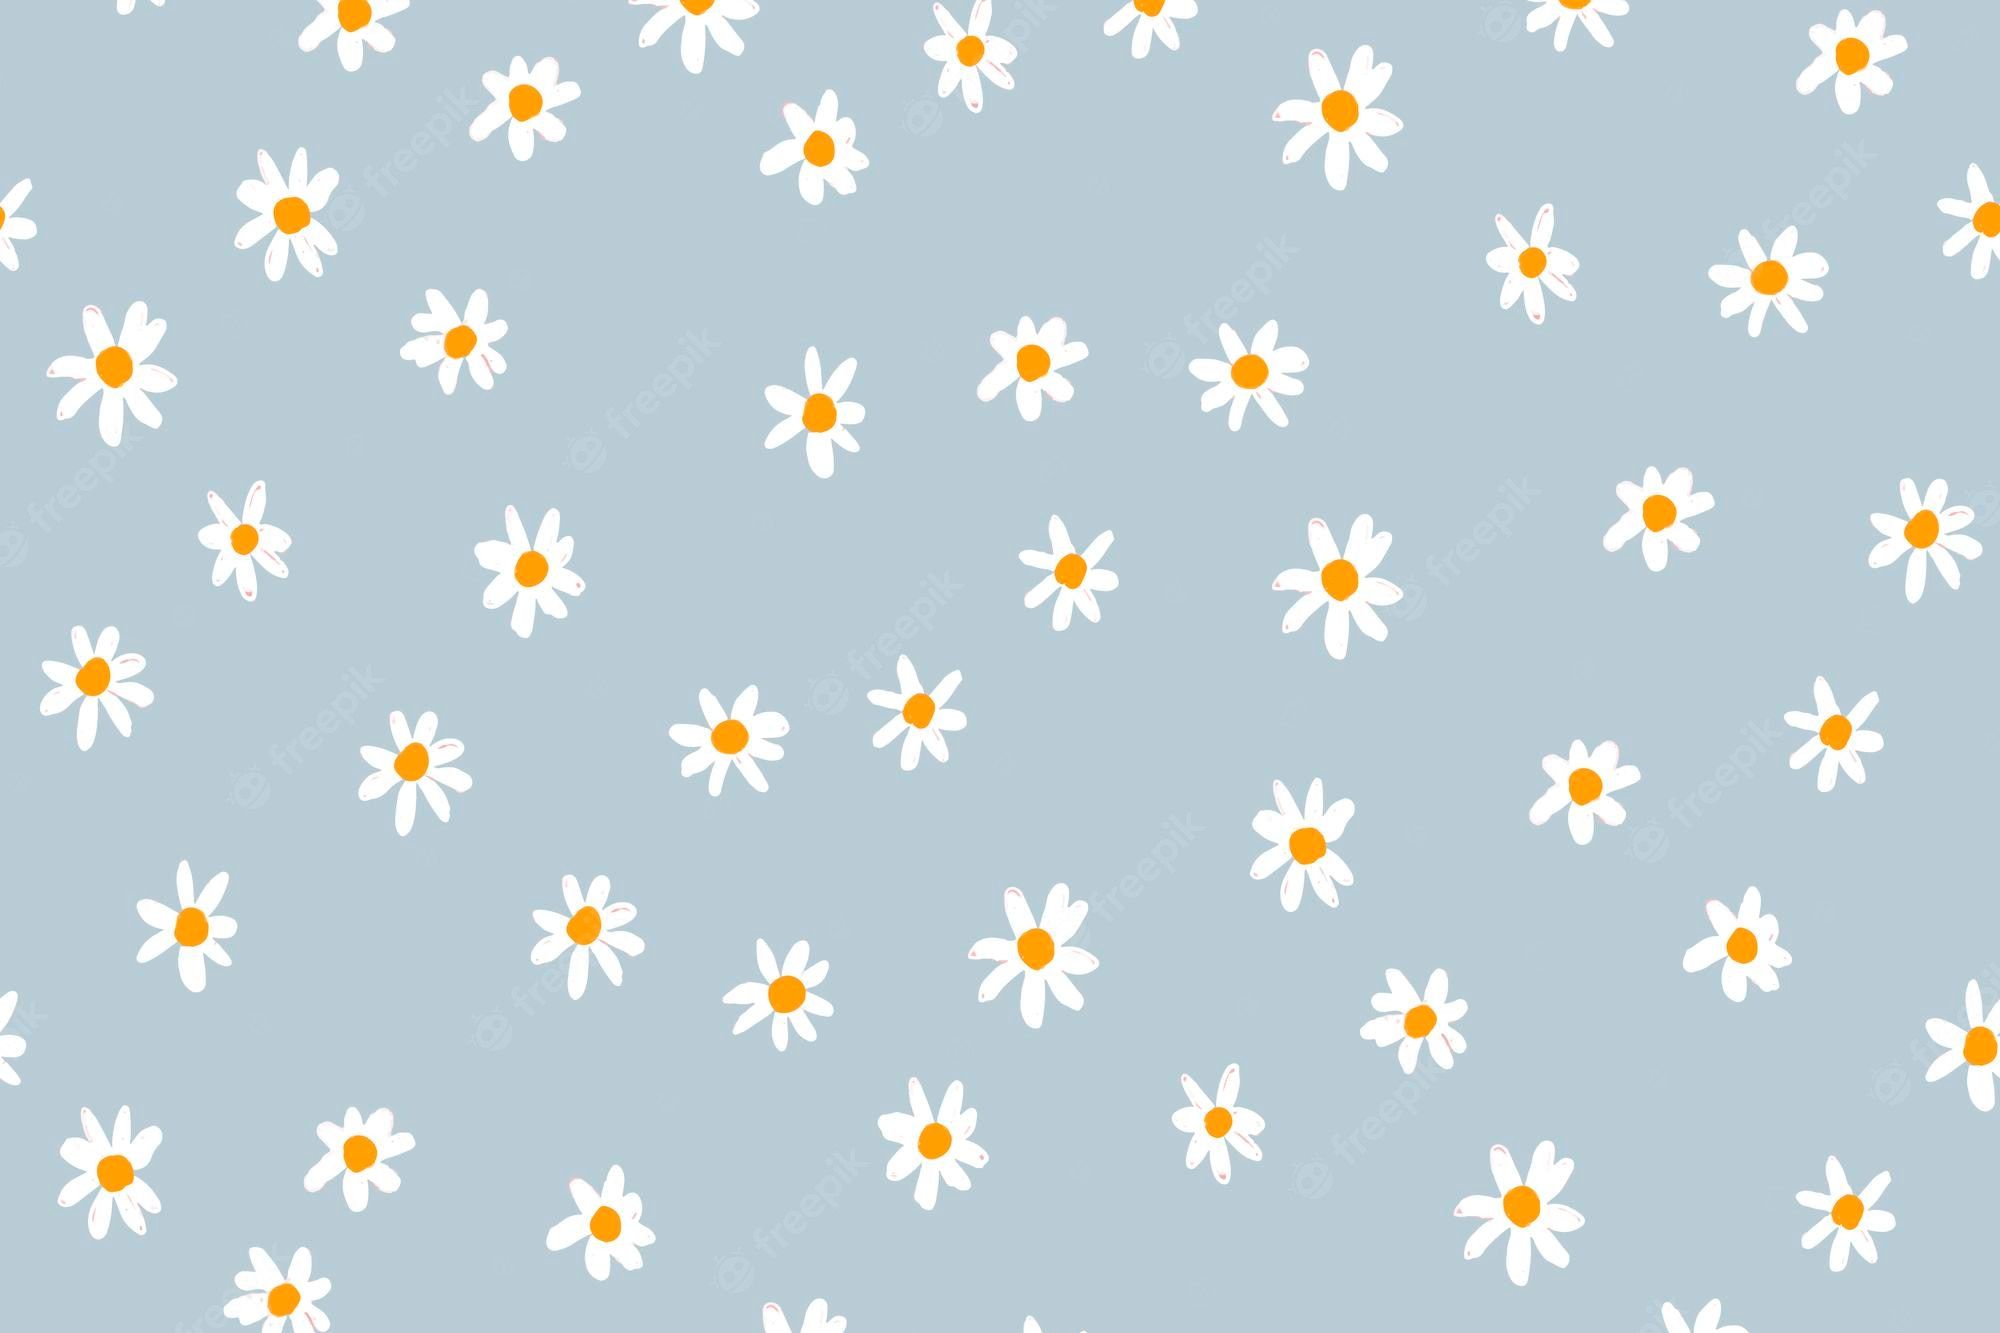 Seamless pattern of daisies on blue background - Desktop, pretty, pattern, daisy, vintage, cute, colorful, simple, vector, design, YouTube